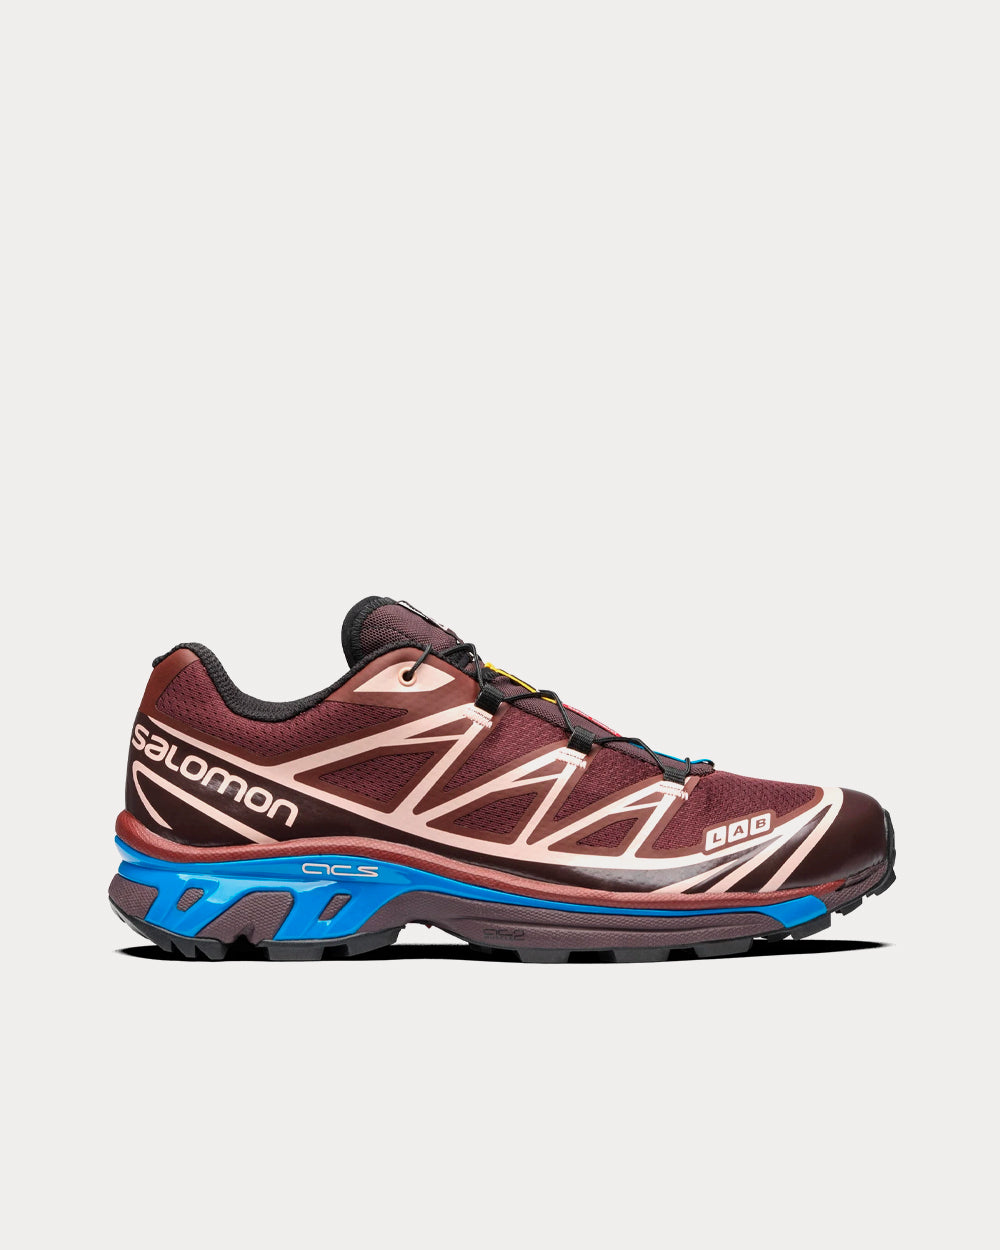 XT-6 Advanced Madder Brown / Mocha Mousse / Chocolate Plum Low Top Sneakers